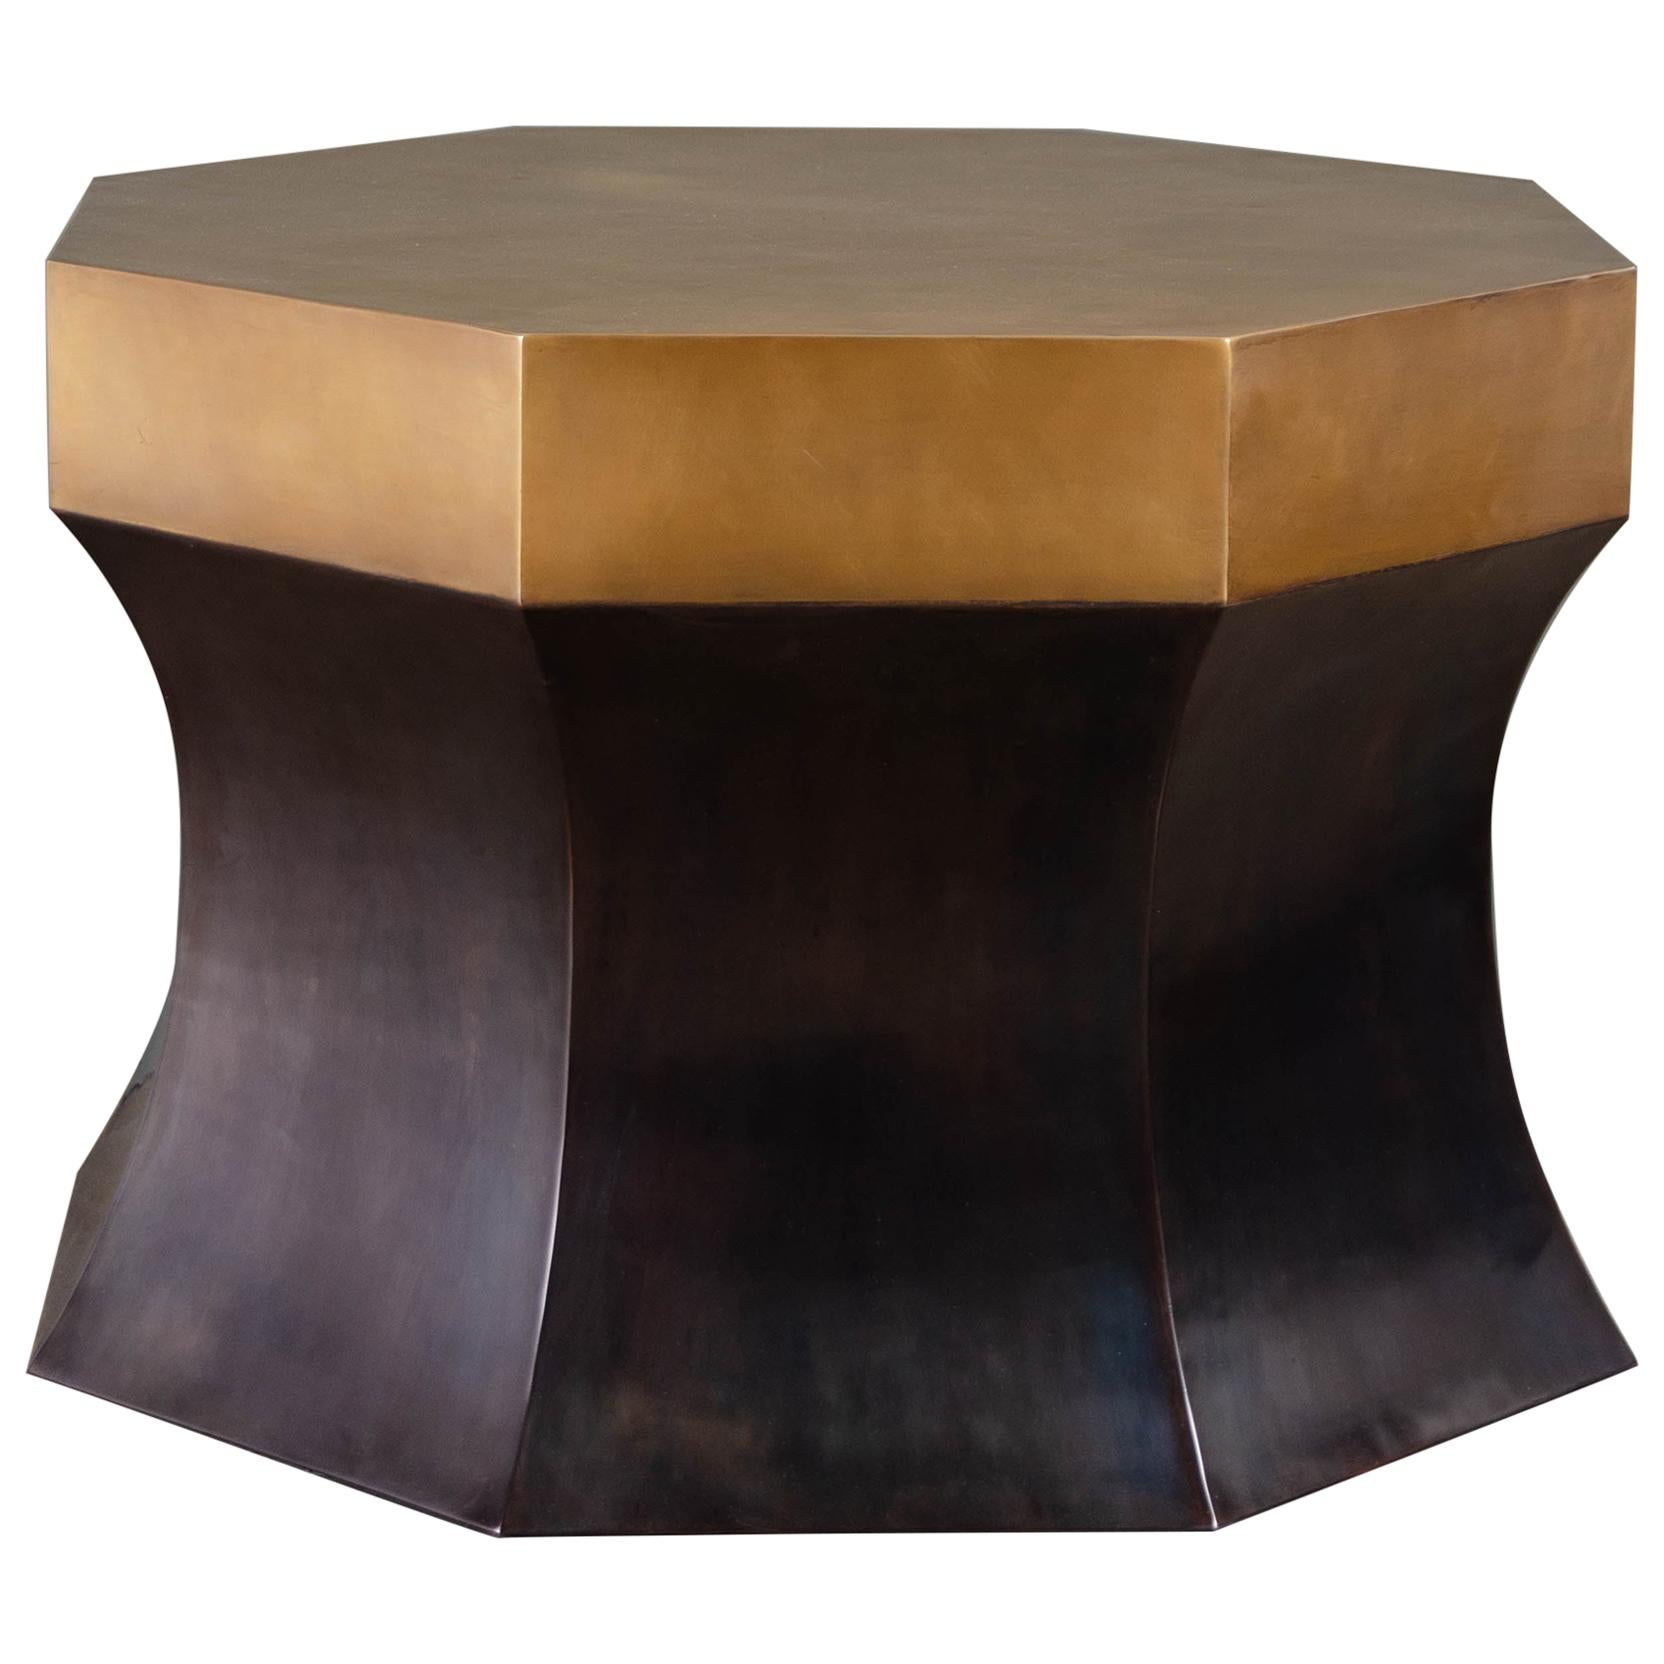 Octagonal Side Table with Brass, Antique Copper by Robert Kuo, Limited Edition